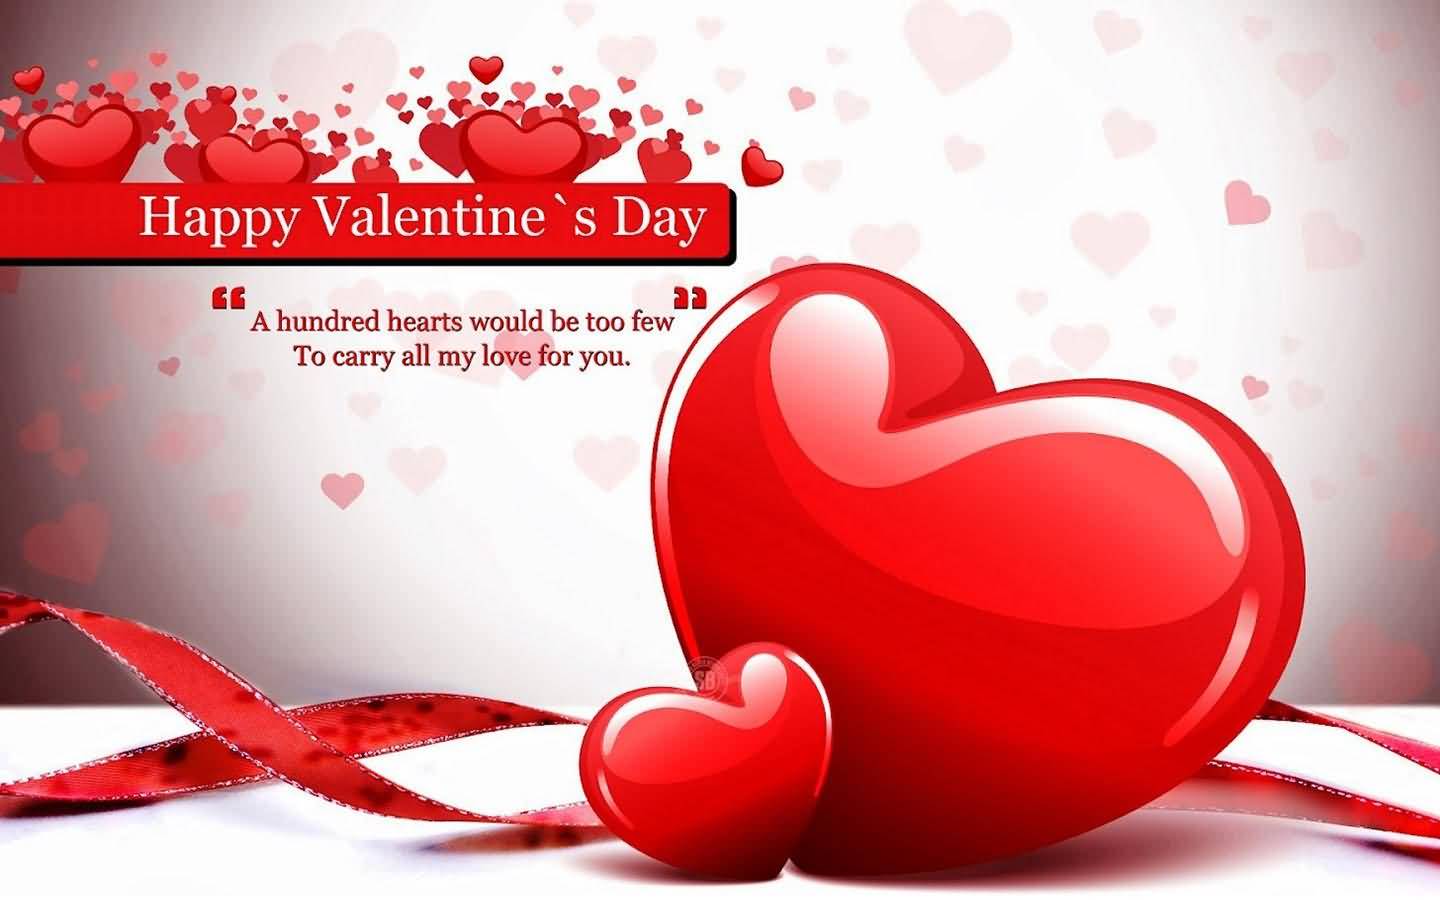 Happy Valentine’s Day A Hundred Hearts Would Be Too Few To Carry All My Love For You Wallpaper